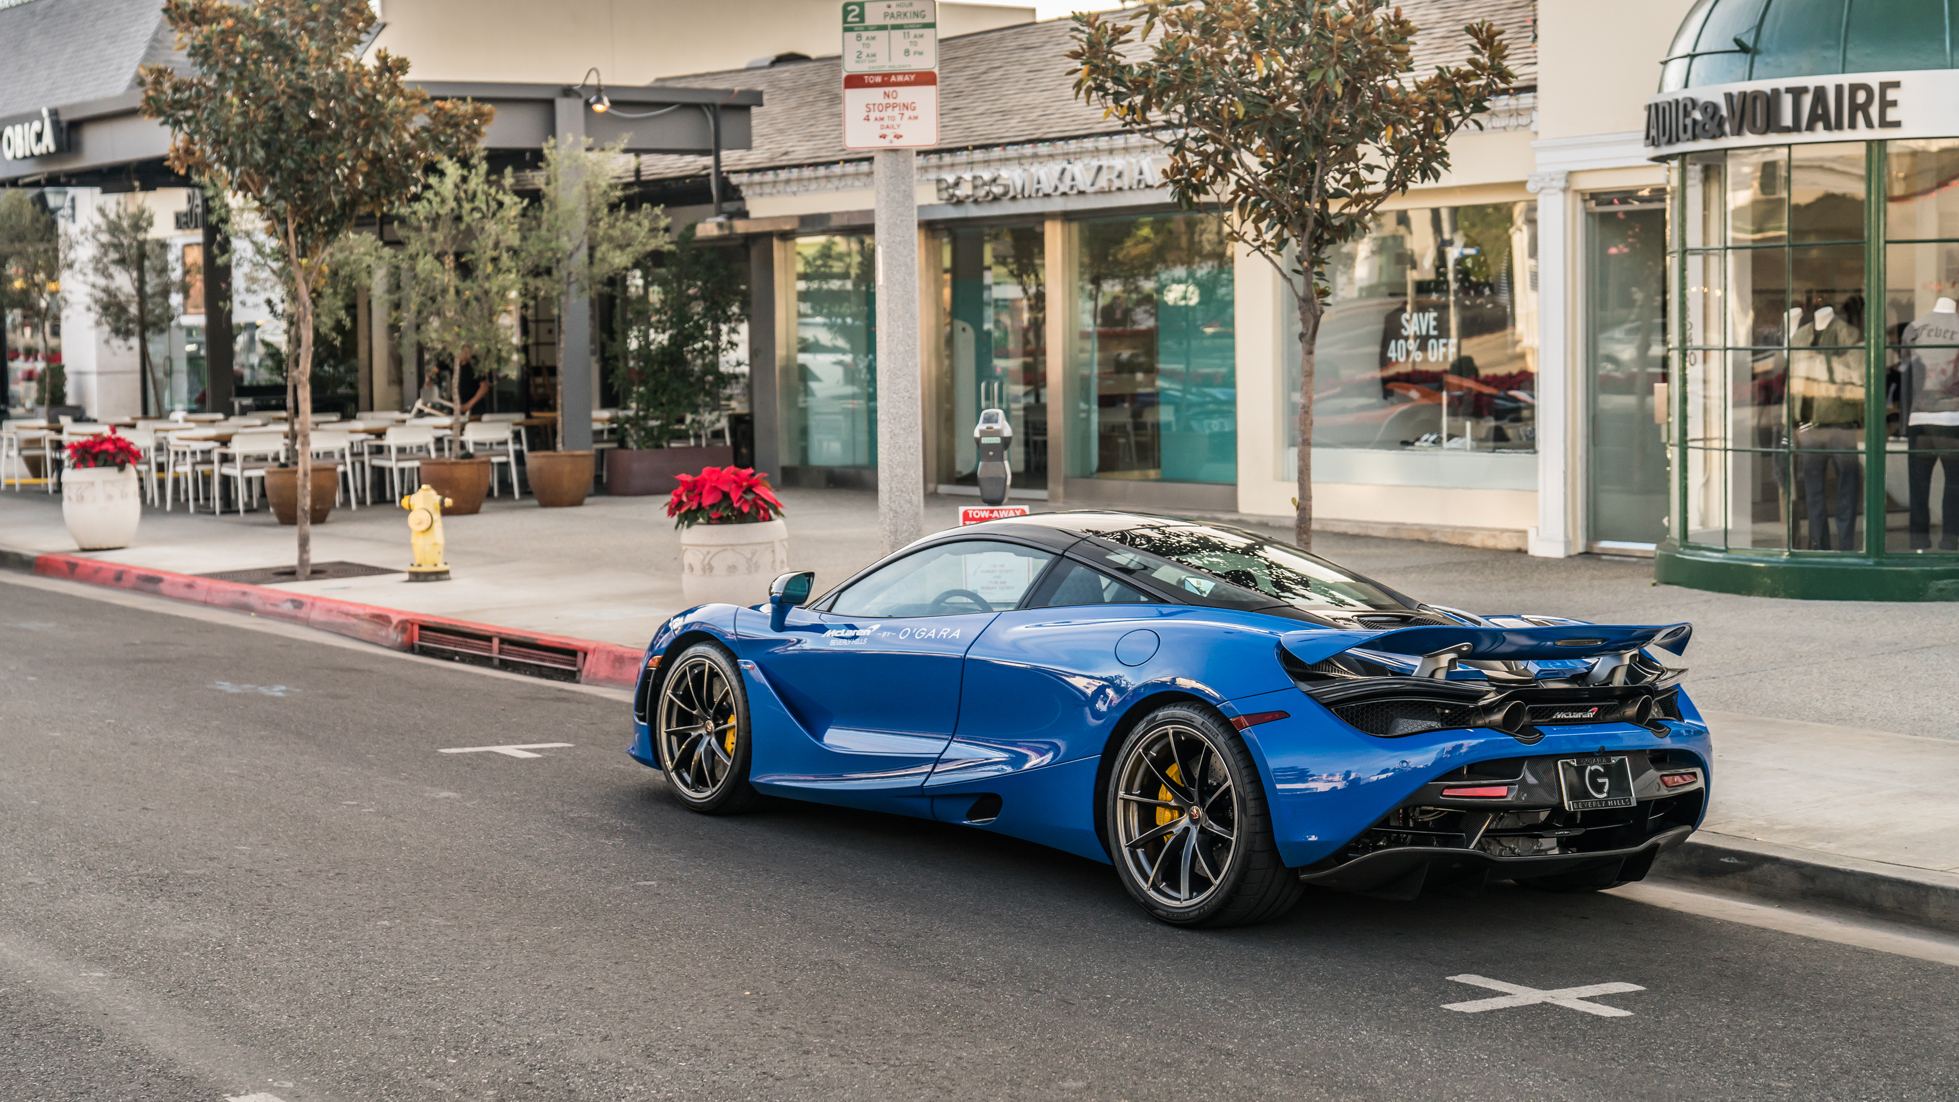 RODEO DRIVE TAKEOVER – MCLAREN BEVERLY HILLS